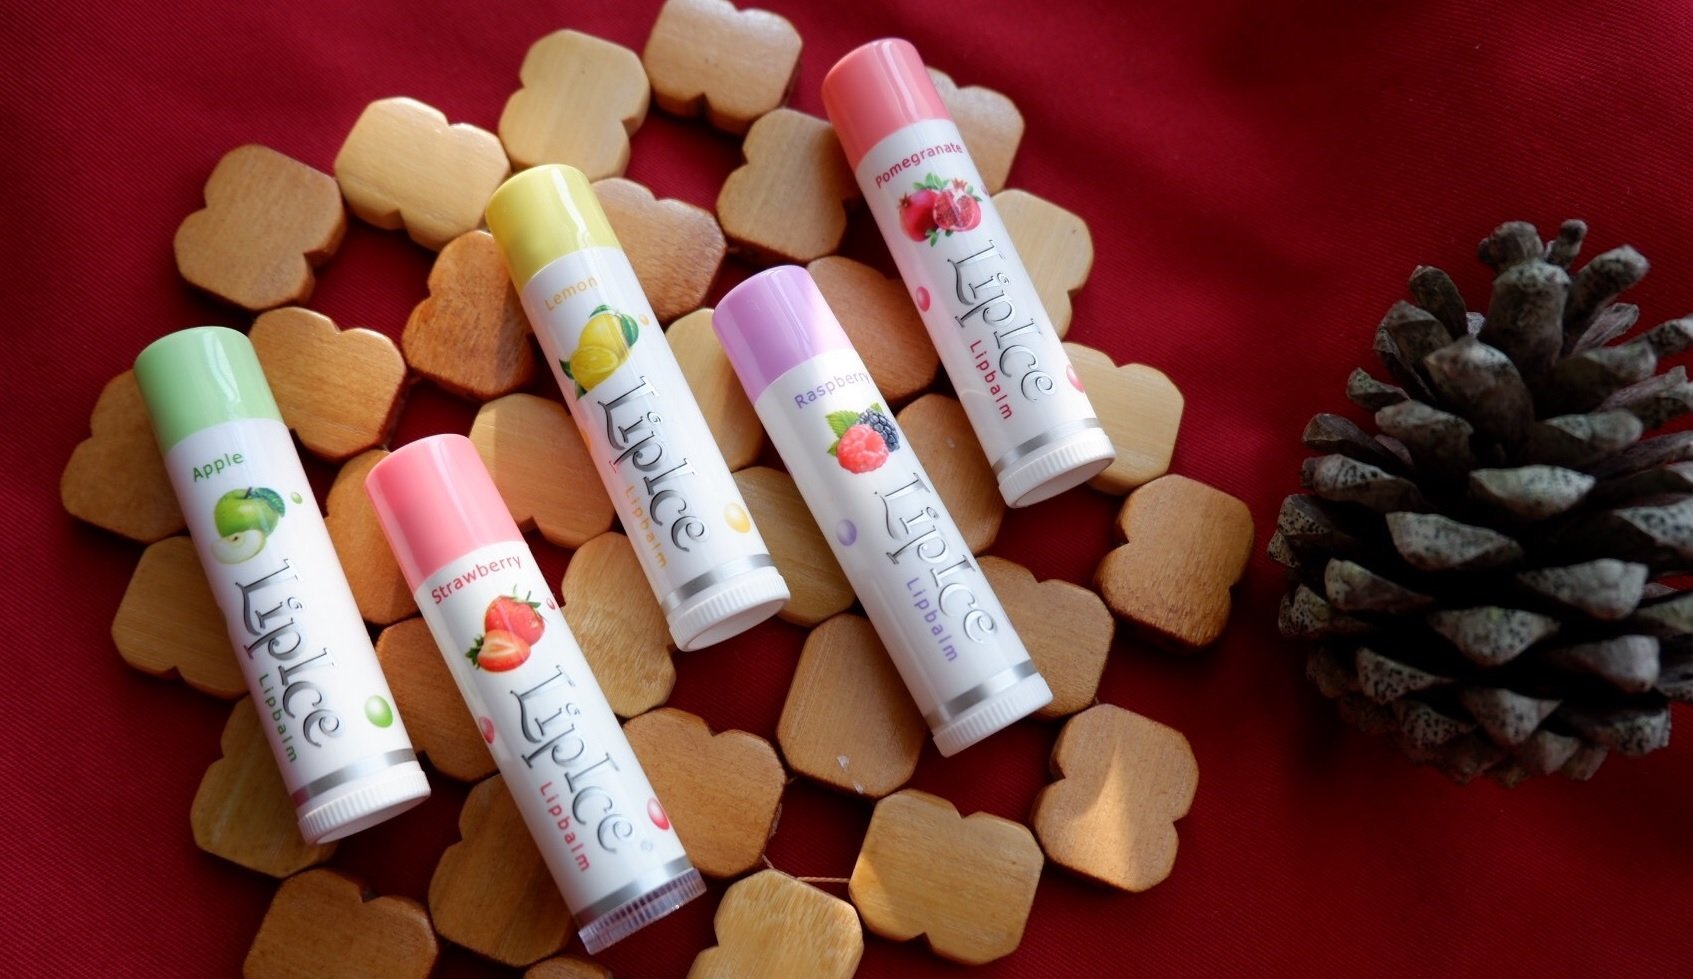 Review son dưỡng môi chống nắng LipIce Lip Balm SPF15 beauty blogger Beauty Blogger Vanmiu Lipice LipIce Lip Balm LipIce Lip Balm SPF15 mỹ phẩm PrettyMuchChannel QUIN review mỹ phẩm son dưỡng môi chống nắng son dưỡng môi chống nắng LipIce son dưỡng môi chống nắng LipIce Lip Balm son dưỡng môi Lipice